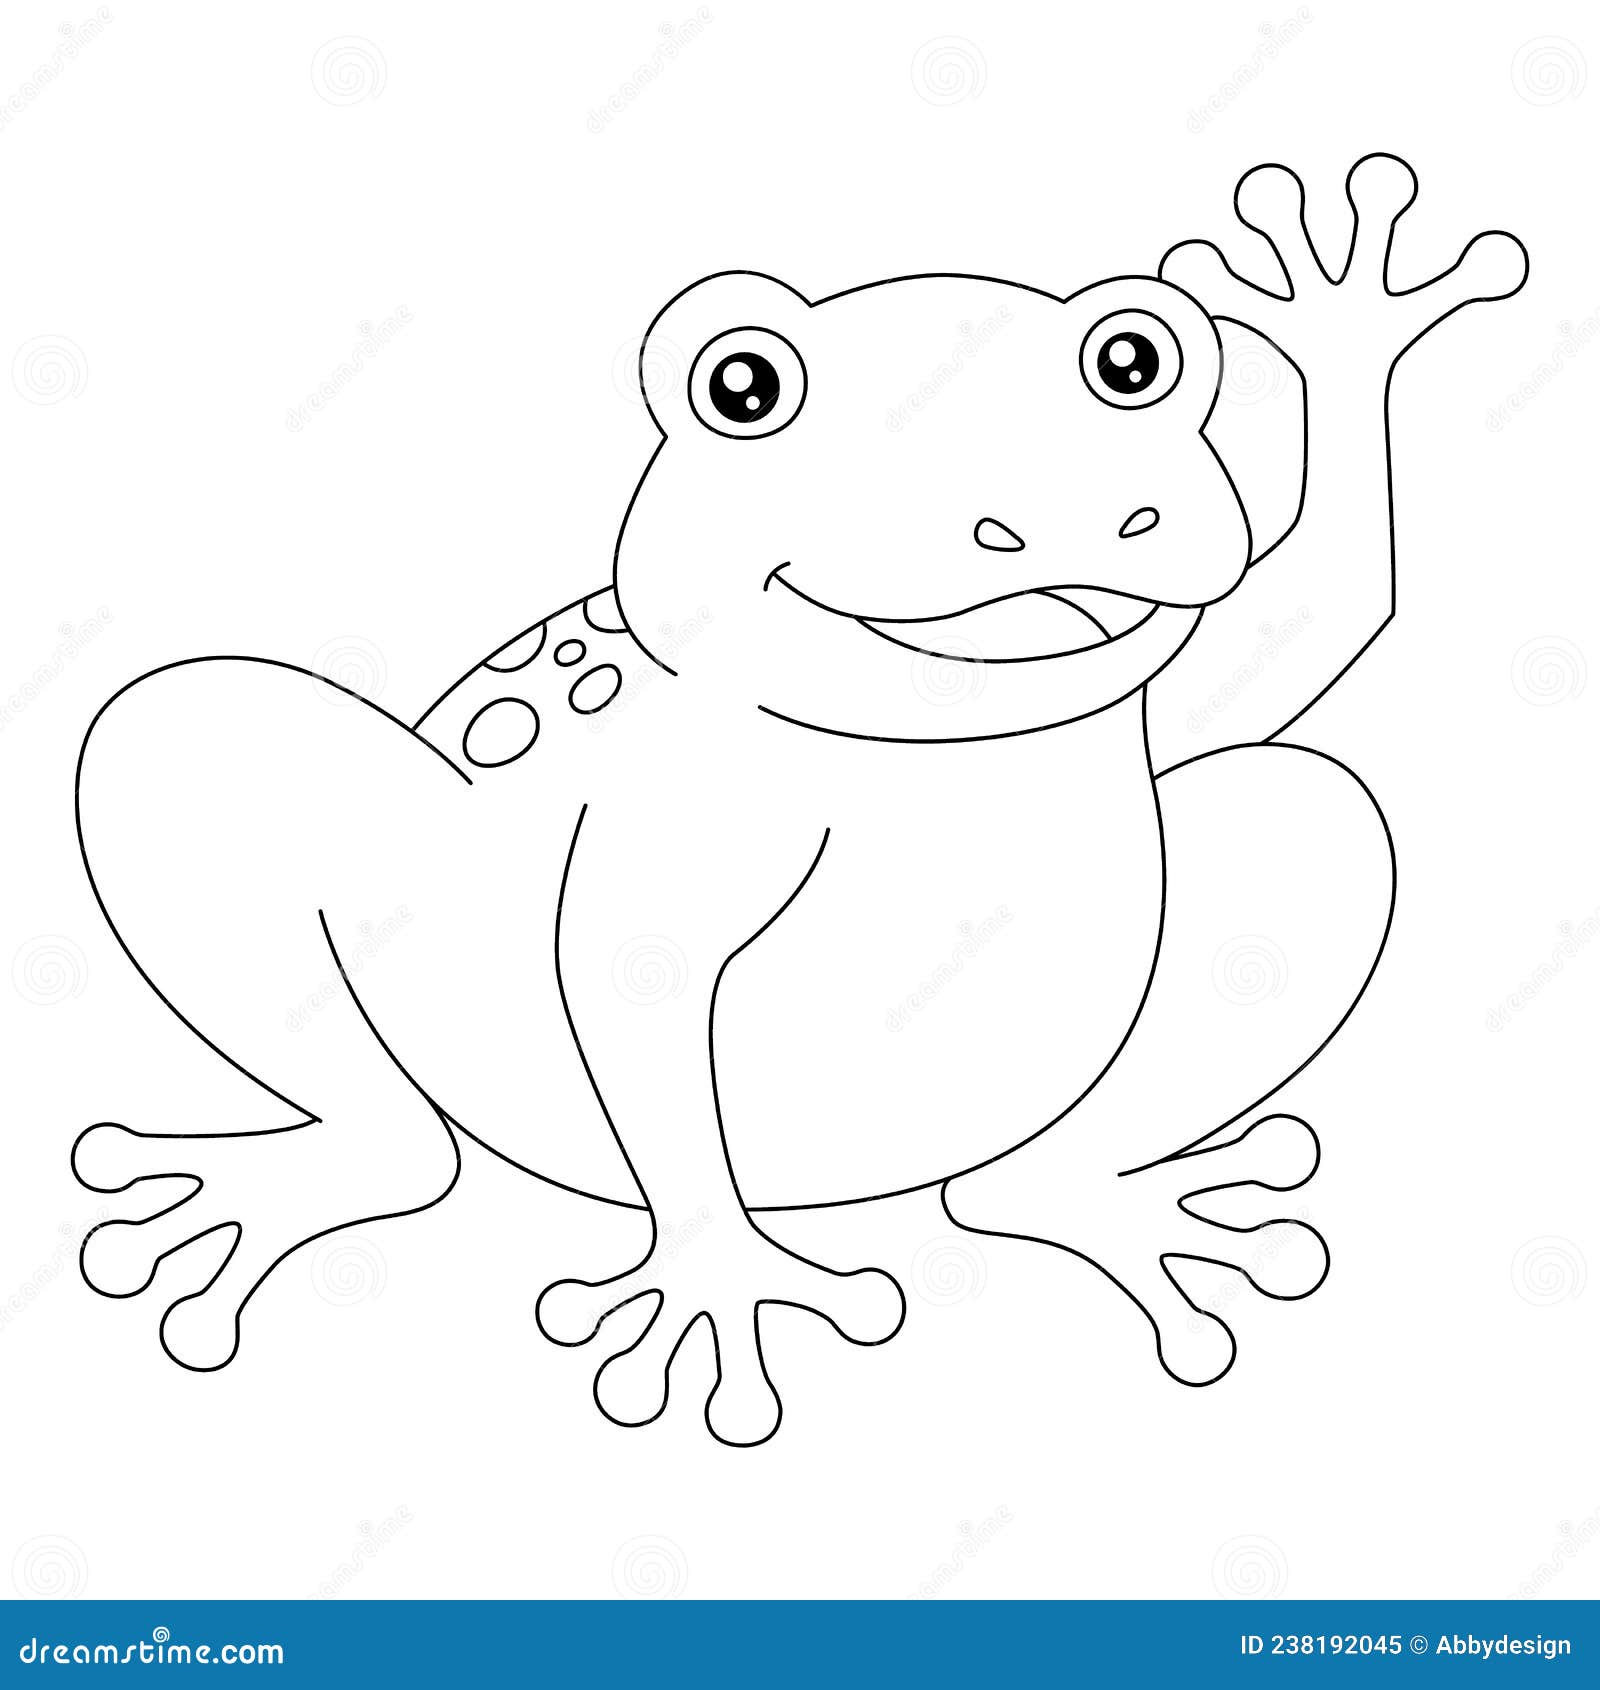 Frog coloring page isolated for kids stock vector